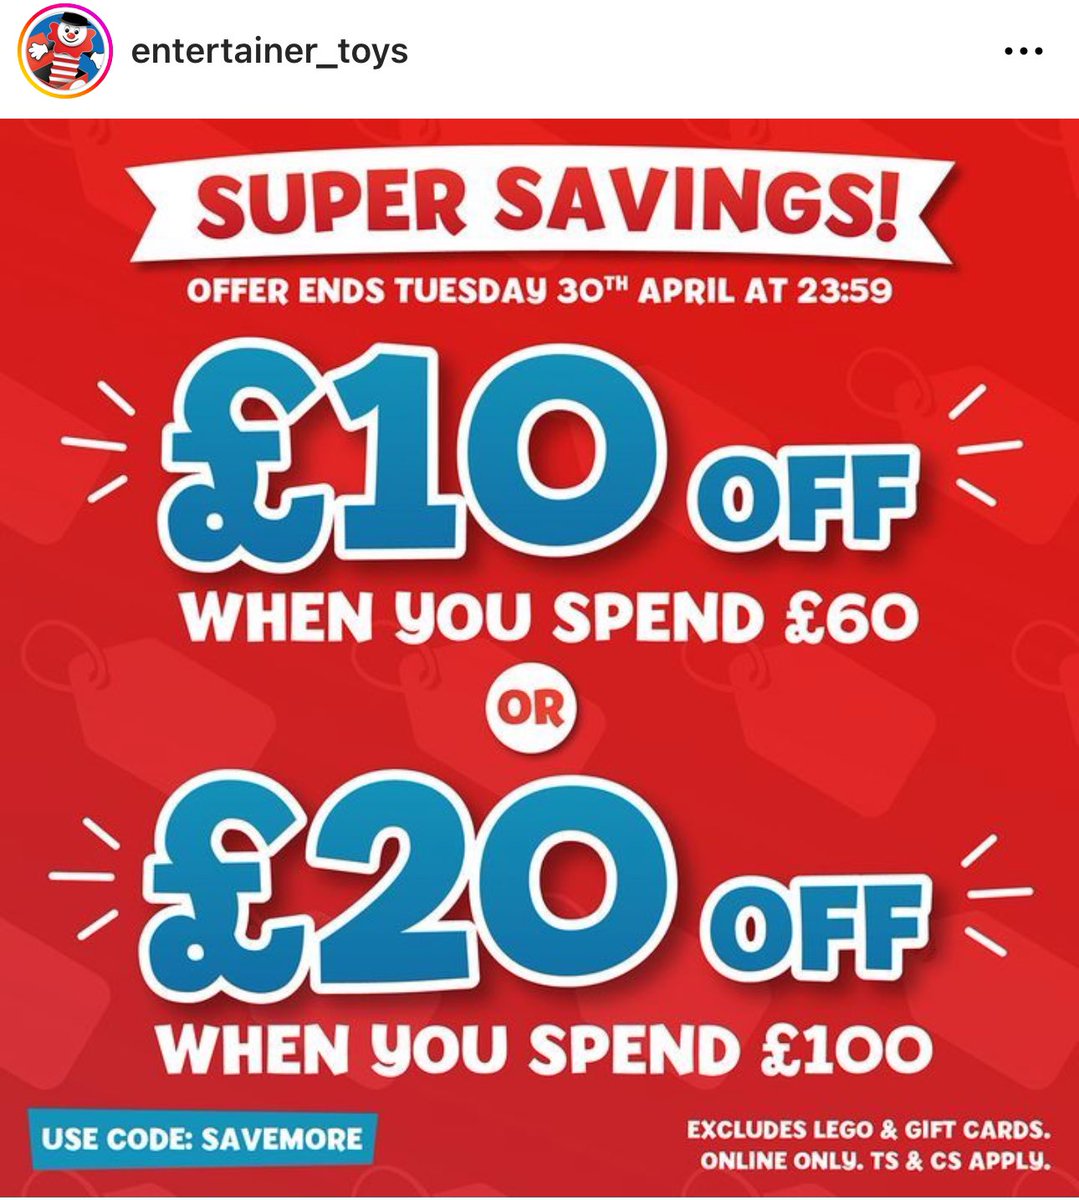 Here’s a lovely offer to save some money @EntertainerToys #EntertainerToys 😁👍🏻 It’s a pity that it doesn’t include #Lego 🤔 Hopefully next time!!

#TheEntertainer
#ToyShop
#ToyShops
#Toys
#ToyHunter
#ToyHunting